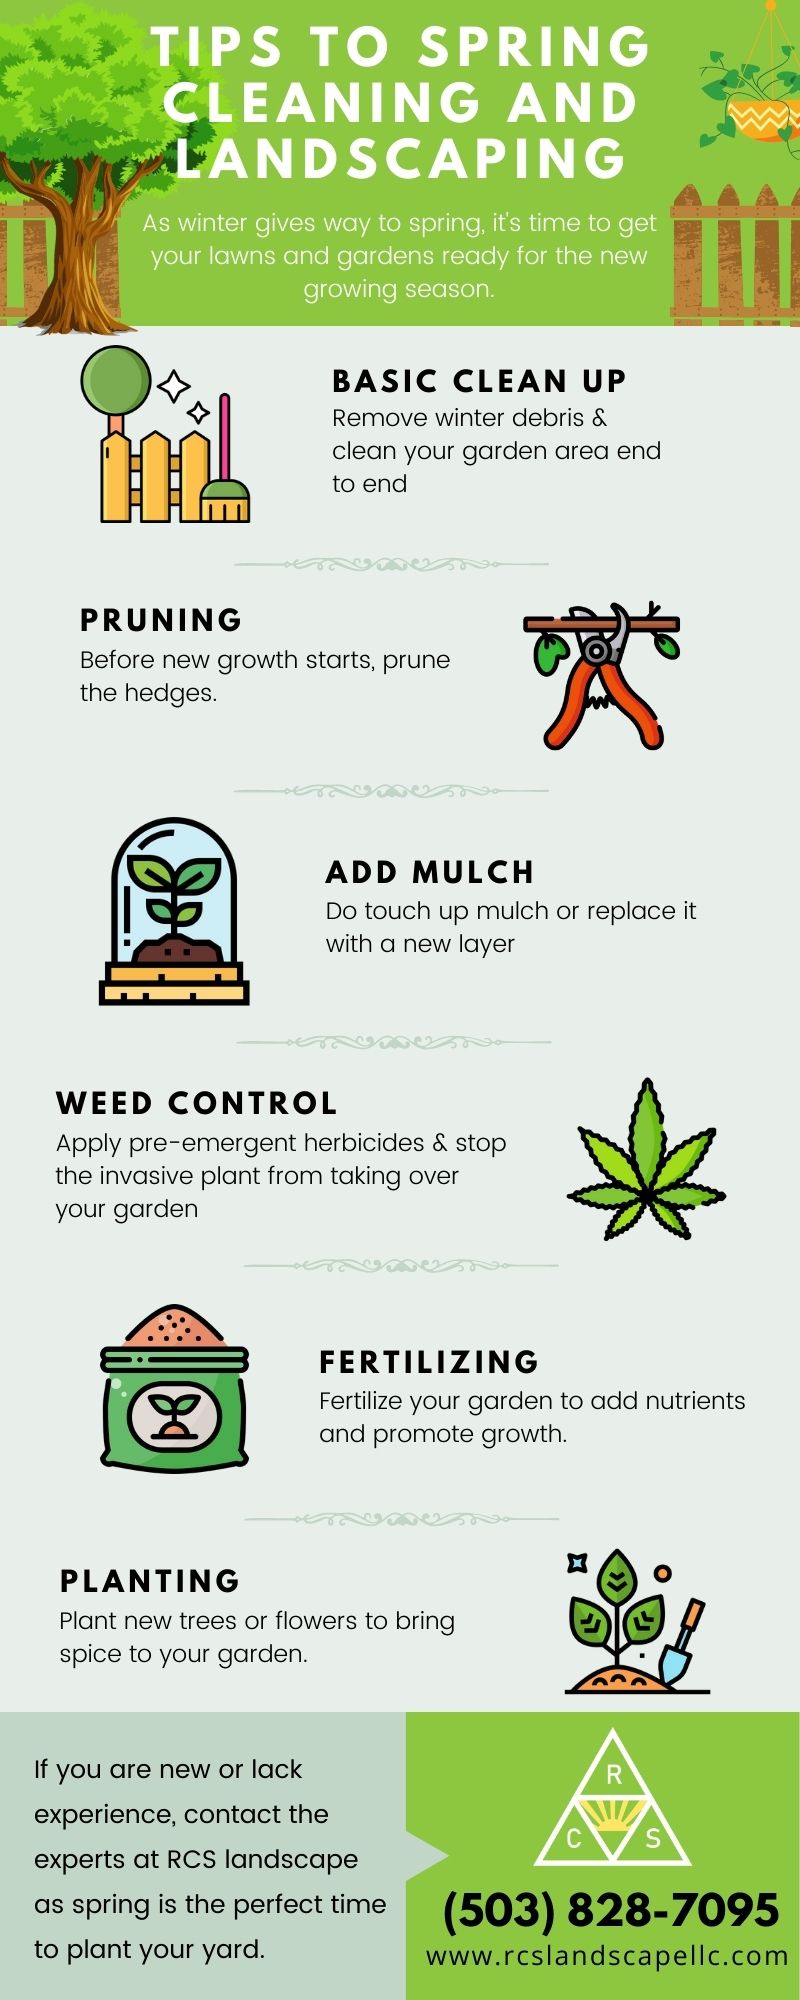 Tips To Spring Cleaning And Landscaping Infographic